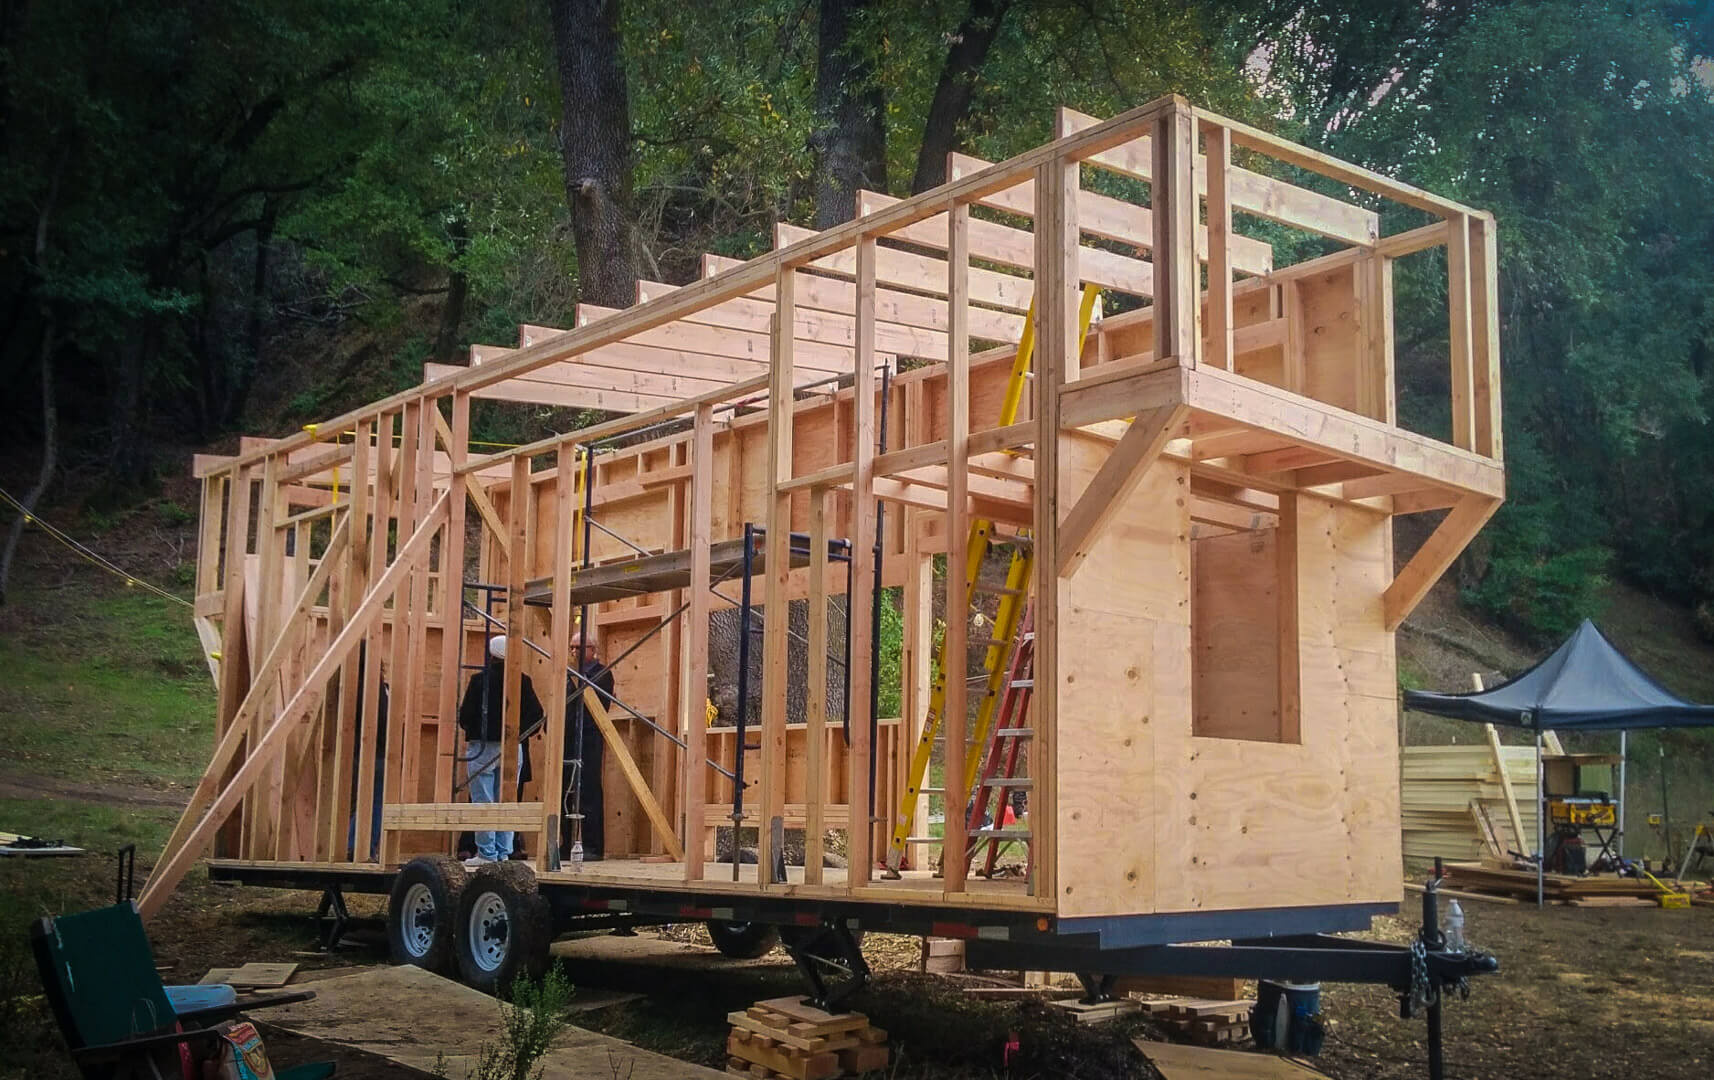 Where To Start Building A Tiny House